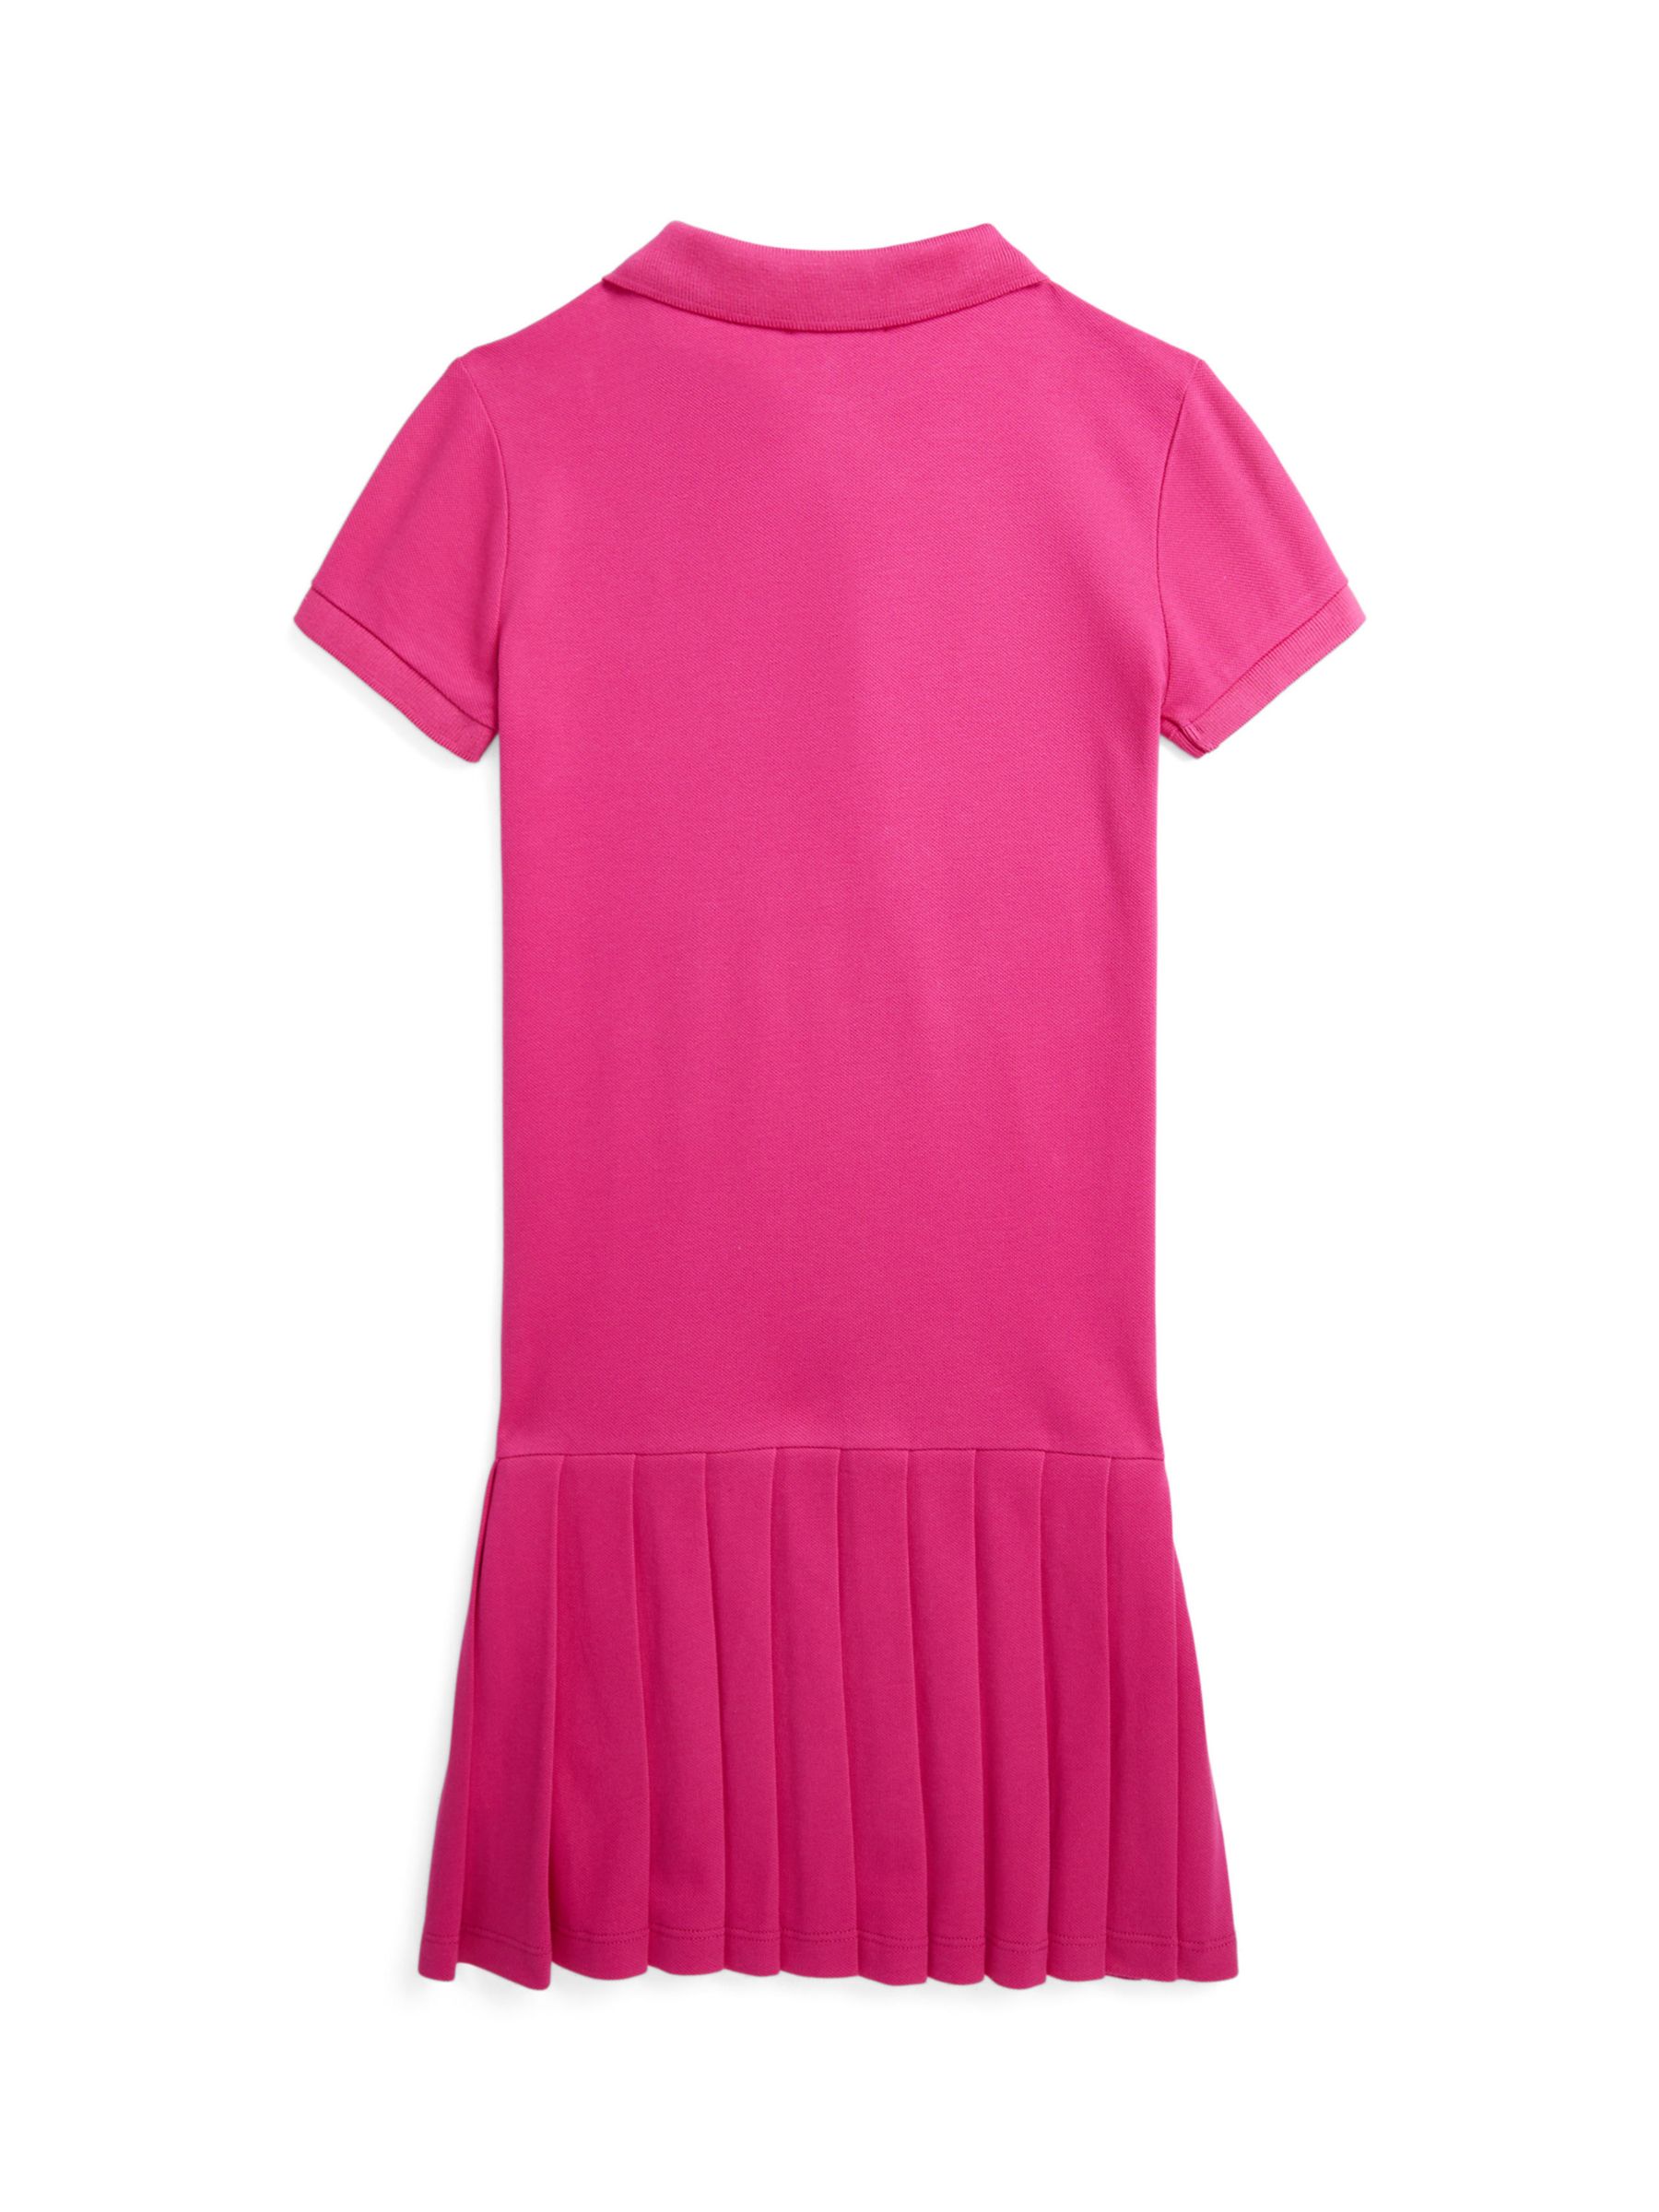 Buy Ralph Lauren Kids' Pleated Polo Dress, Bright Pink Online at johnlewis.com